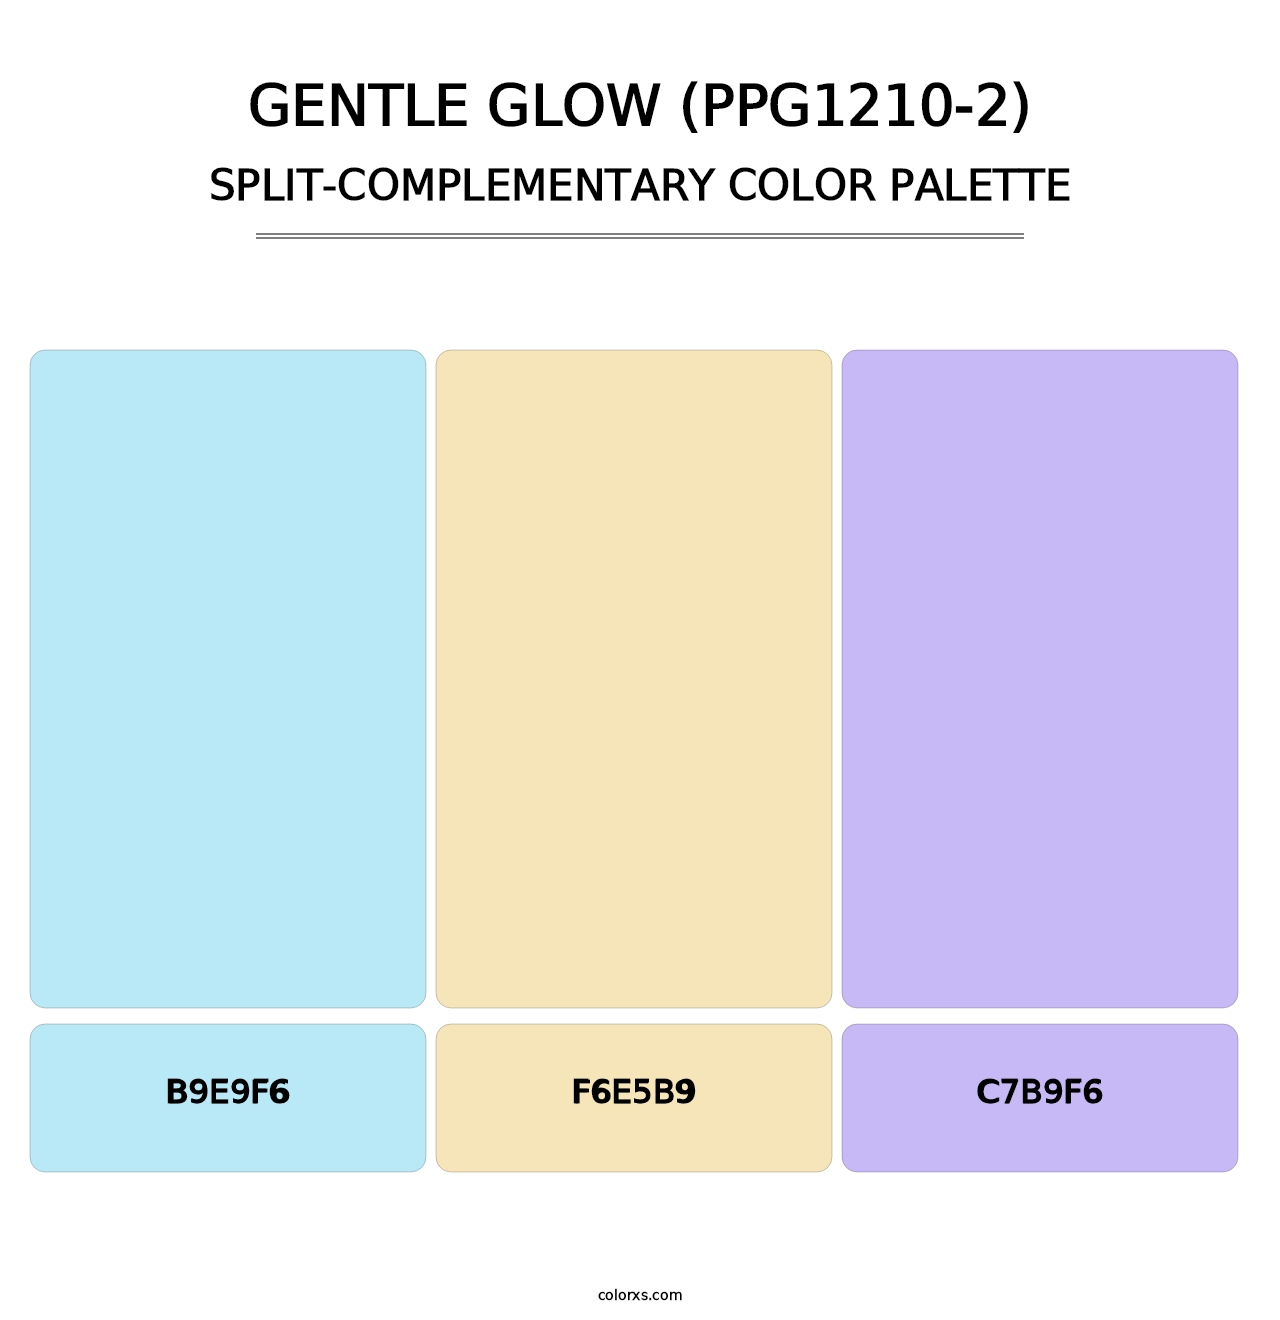 Gentle Glow (PPG1210-2) - Split-Complementary Color Palette